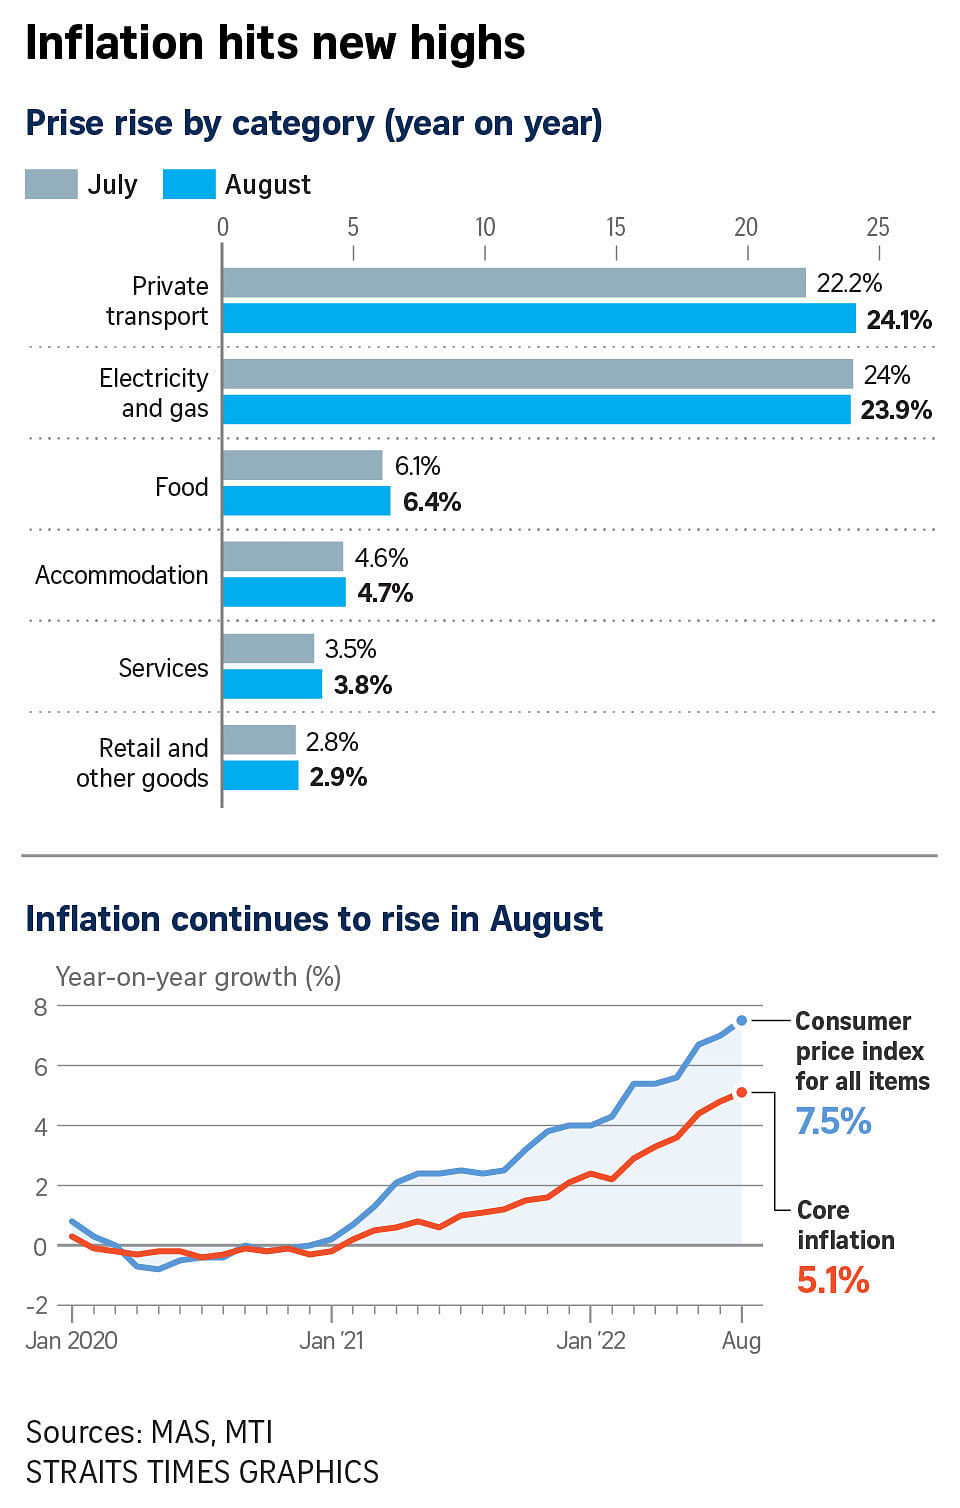 ONLINE-220923-CHARTS_Inflation-measures-hit-new-highs.jpg